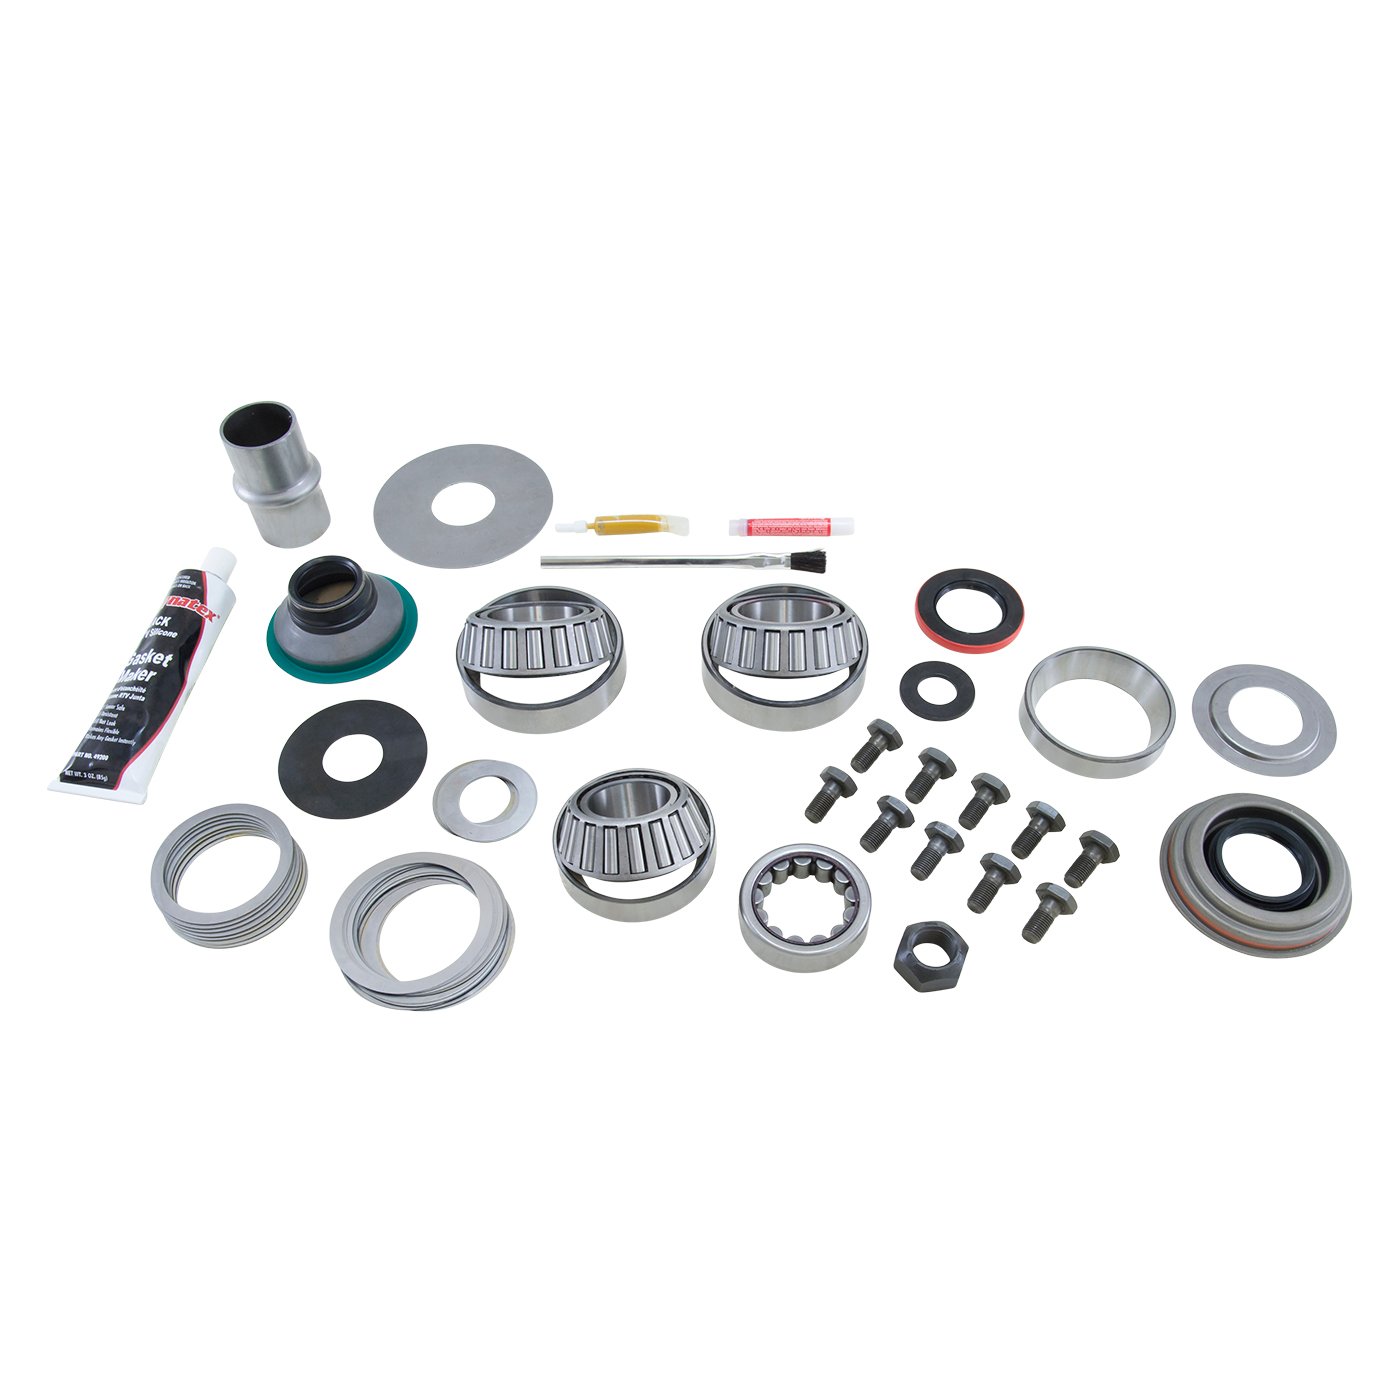 USA Standard ZK D44-IFS-E Master Overhaul Kit, For Dana 44 If Differential, For '92 And Older